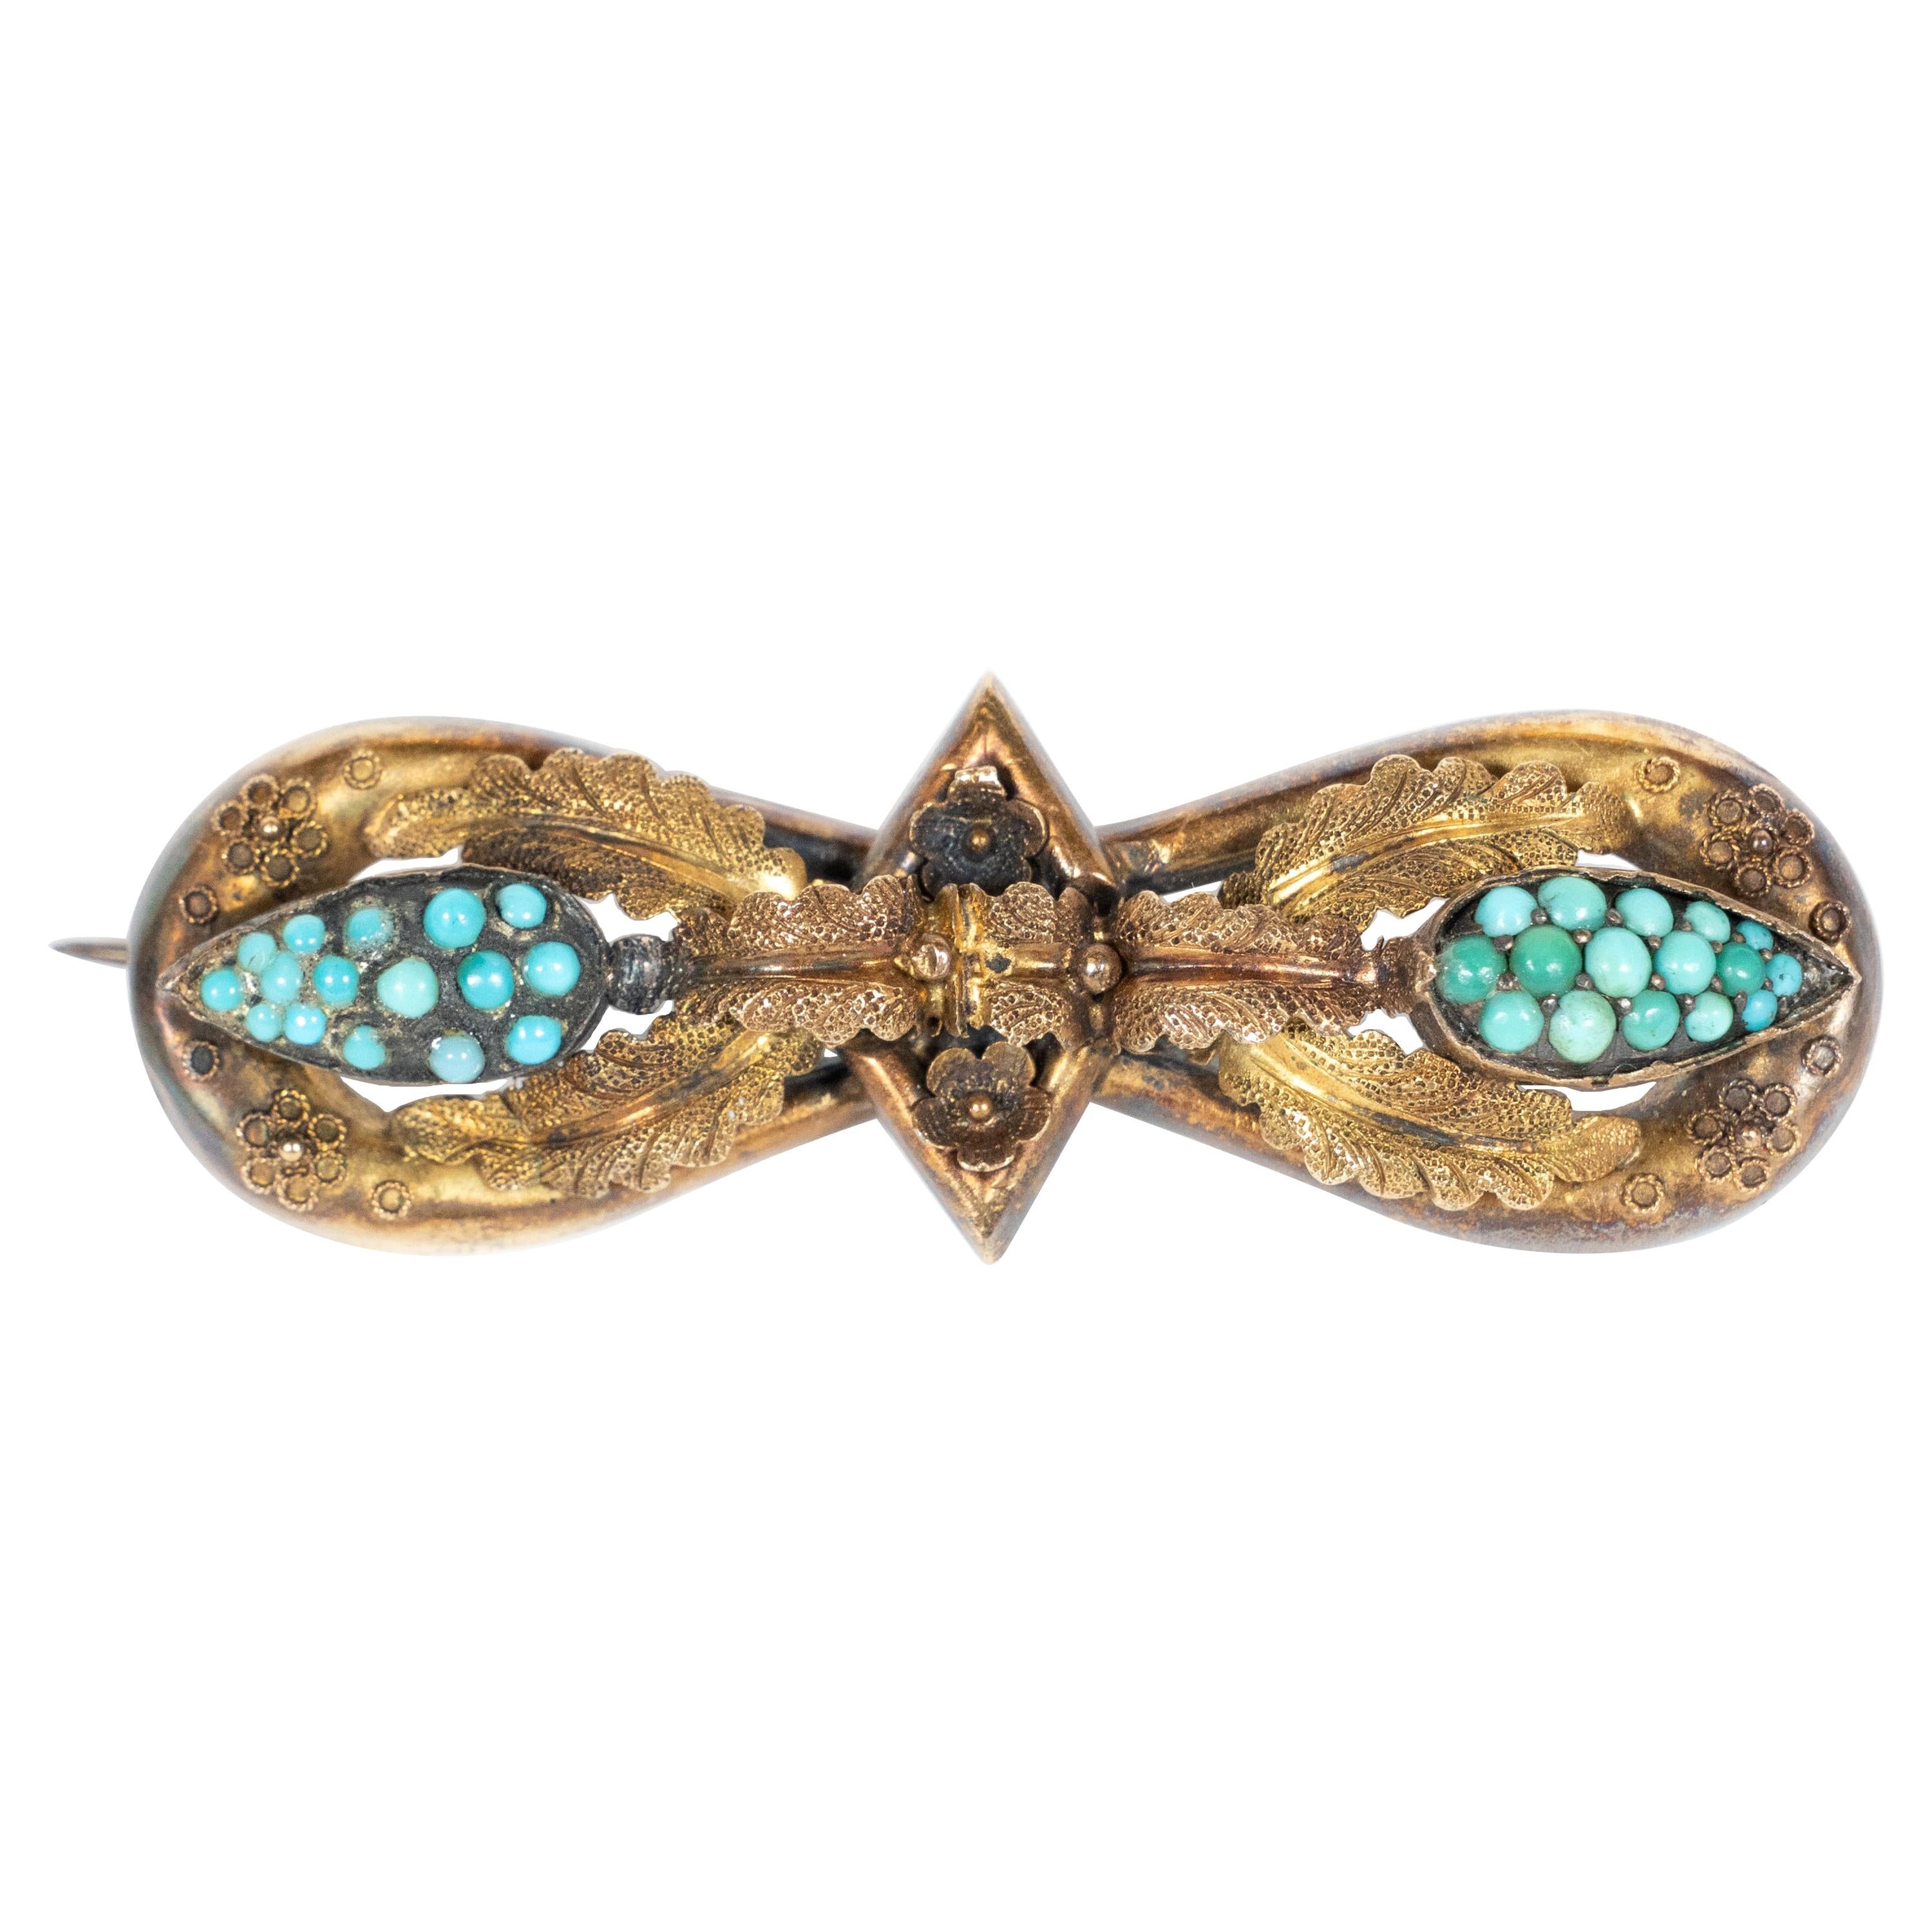 Victorian Hourglass Form 14 Karat Gold Filigreed Brooch with Inlaid Turquoise For Sale